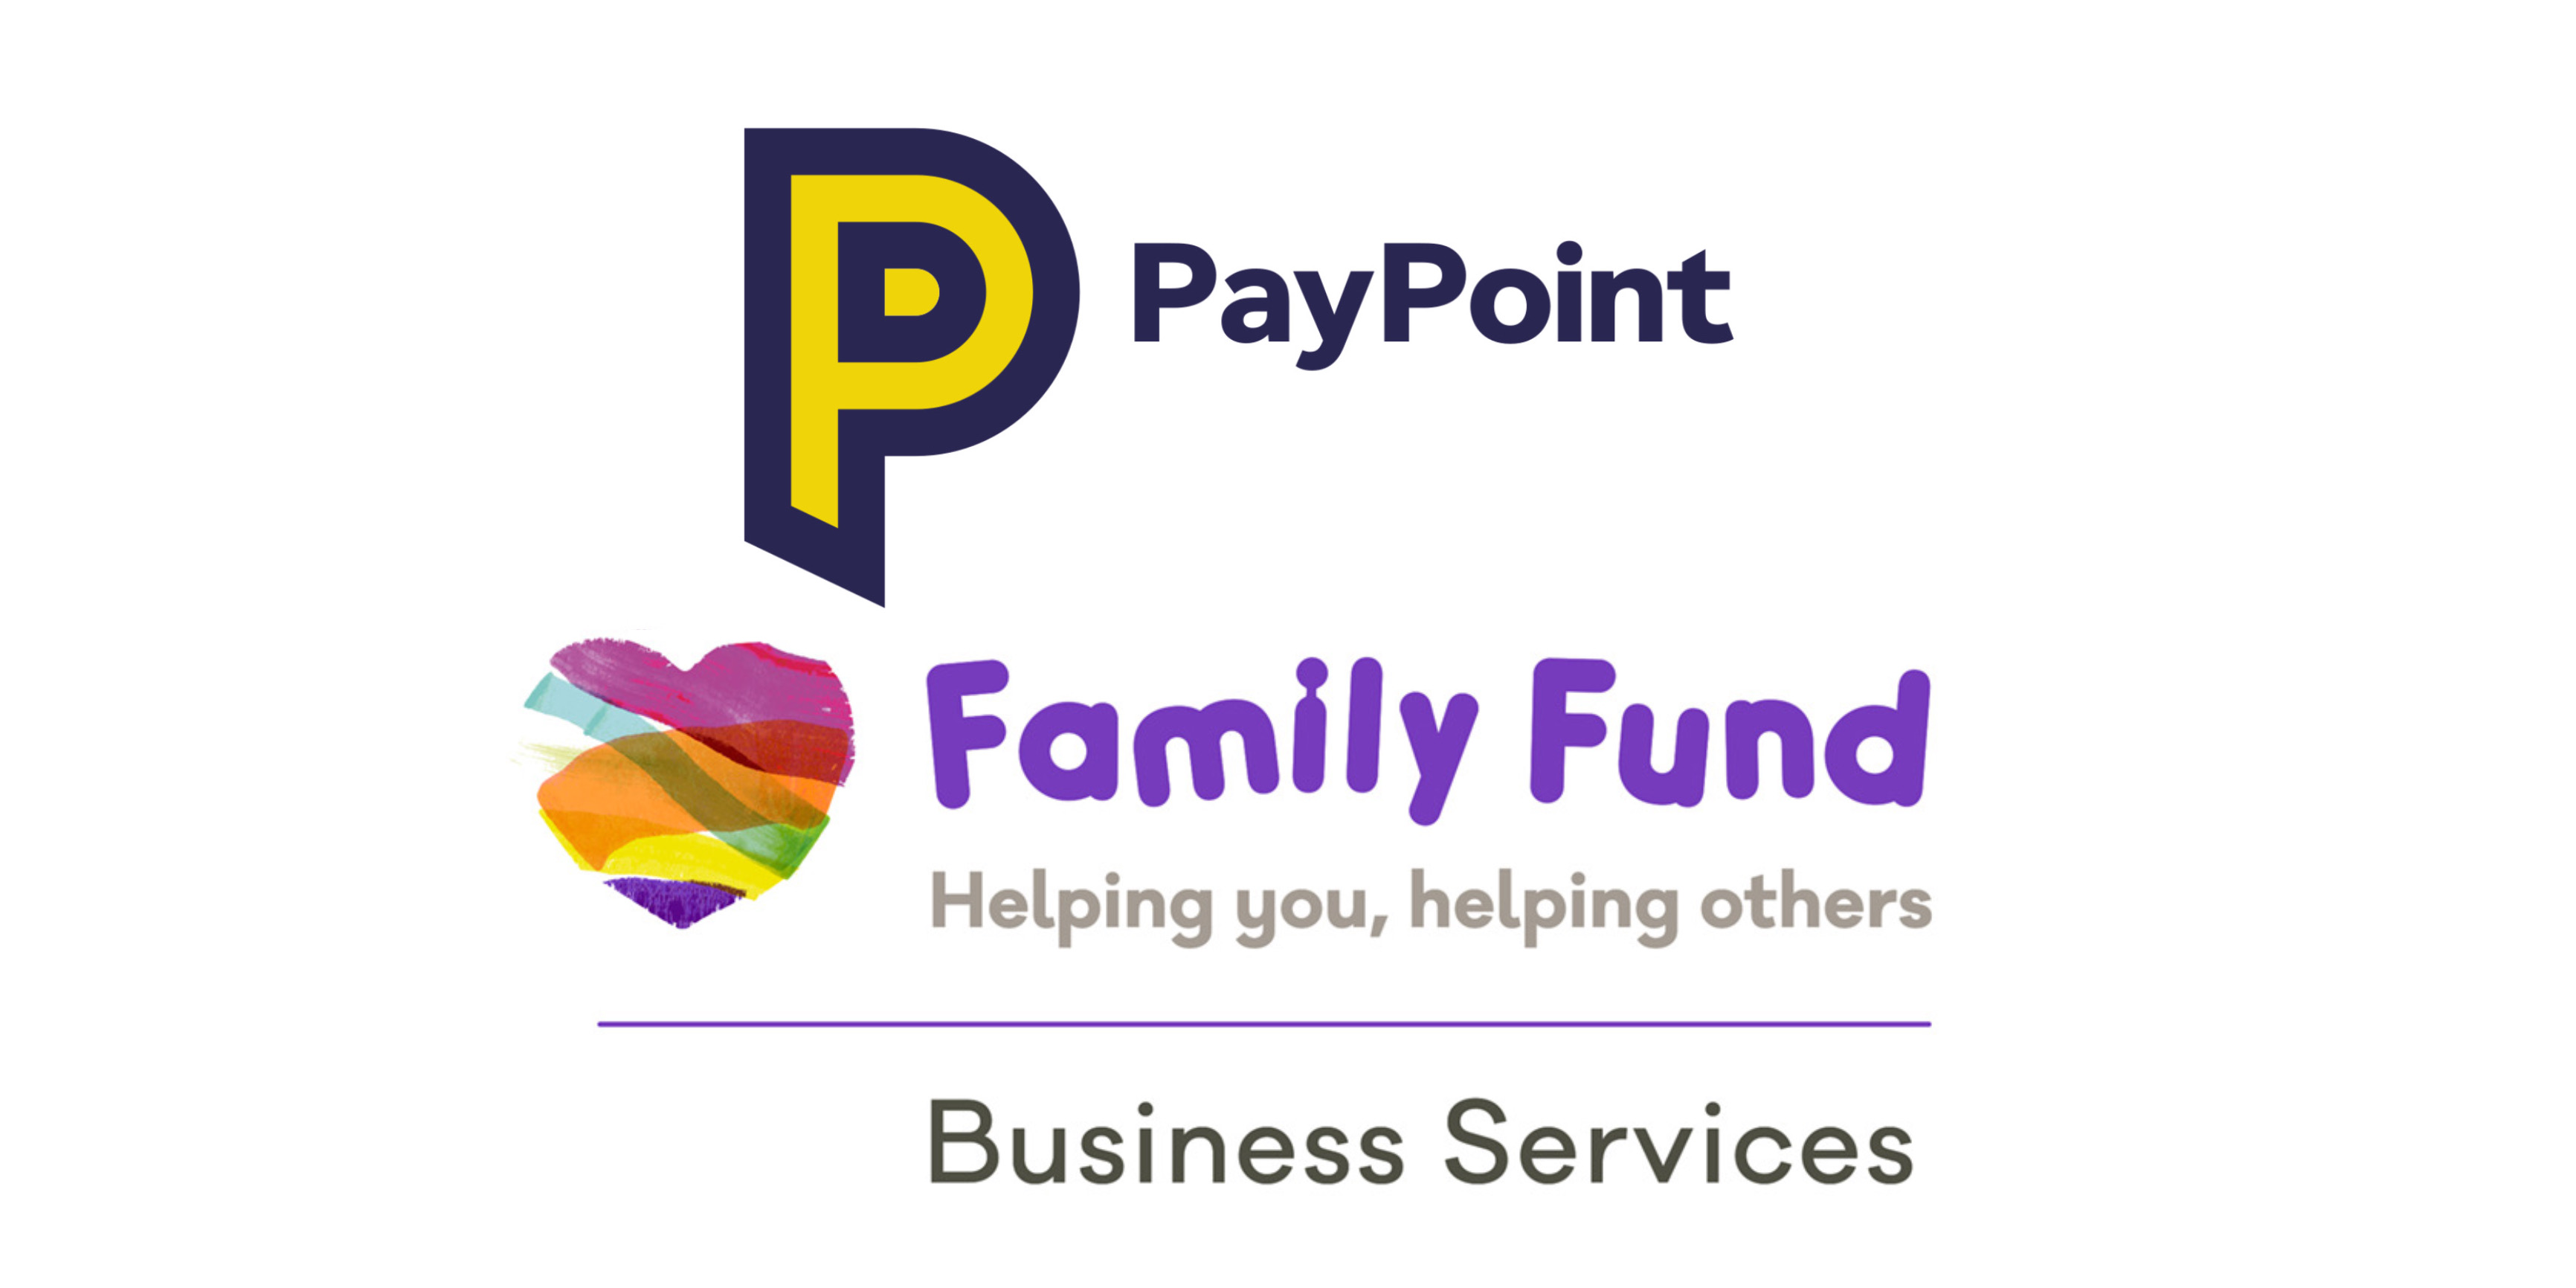  PayPoint Helps Family Fund Business Services Meet Soaring Need for Cash Pay Outs During Pandemic 